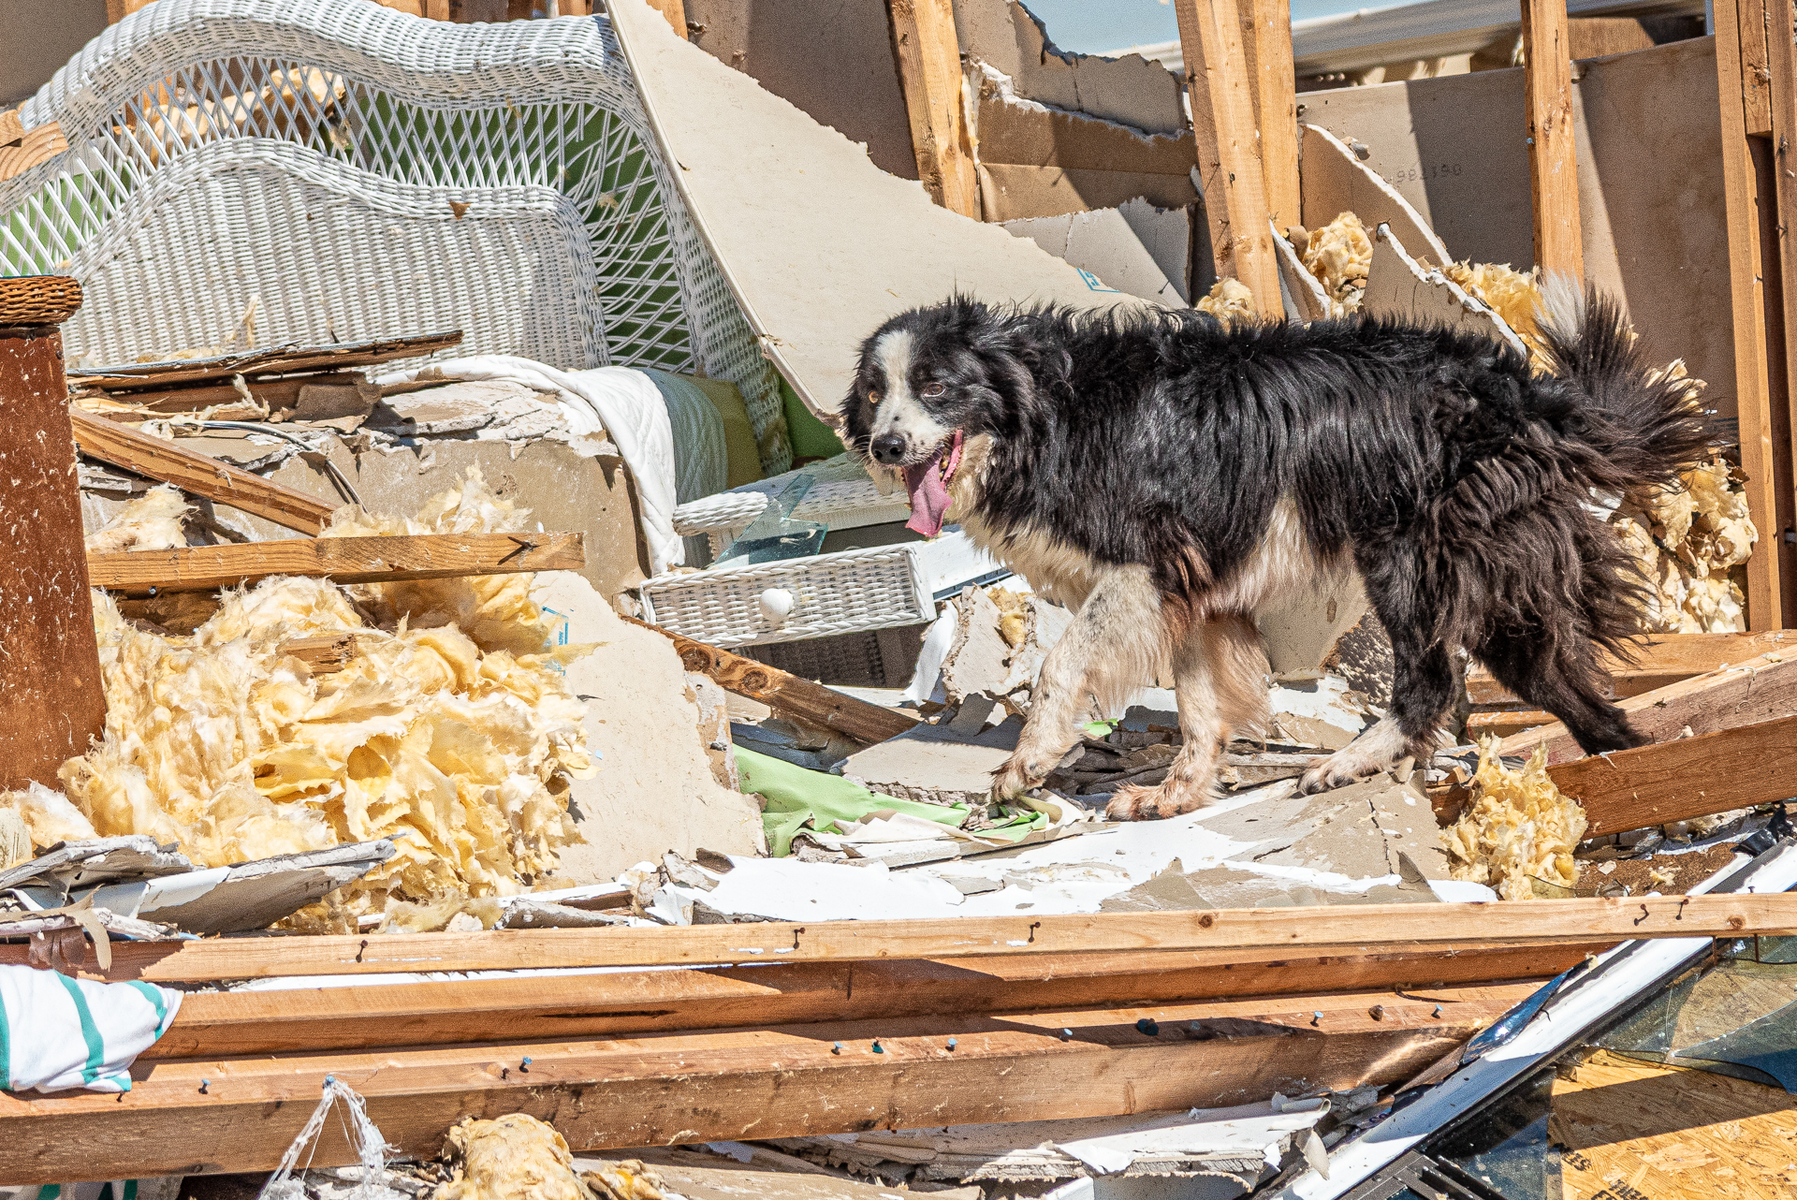 October 18, 2018 - Mexico Beach, FL - A rescue dog performs a search for survivors in the aftermath of Hurricane Michael in Mexico Beach, Florida, on October 10, 2018.. The strongest storm on record to ever make landfall in Northwest Florida, and the fourth most powerful to ever hit the continental United States.